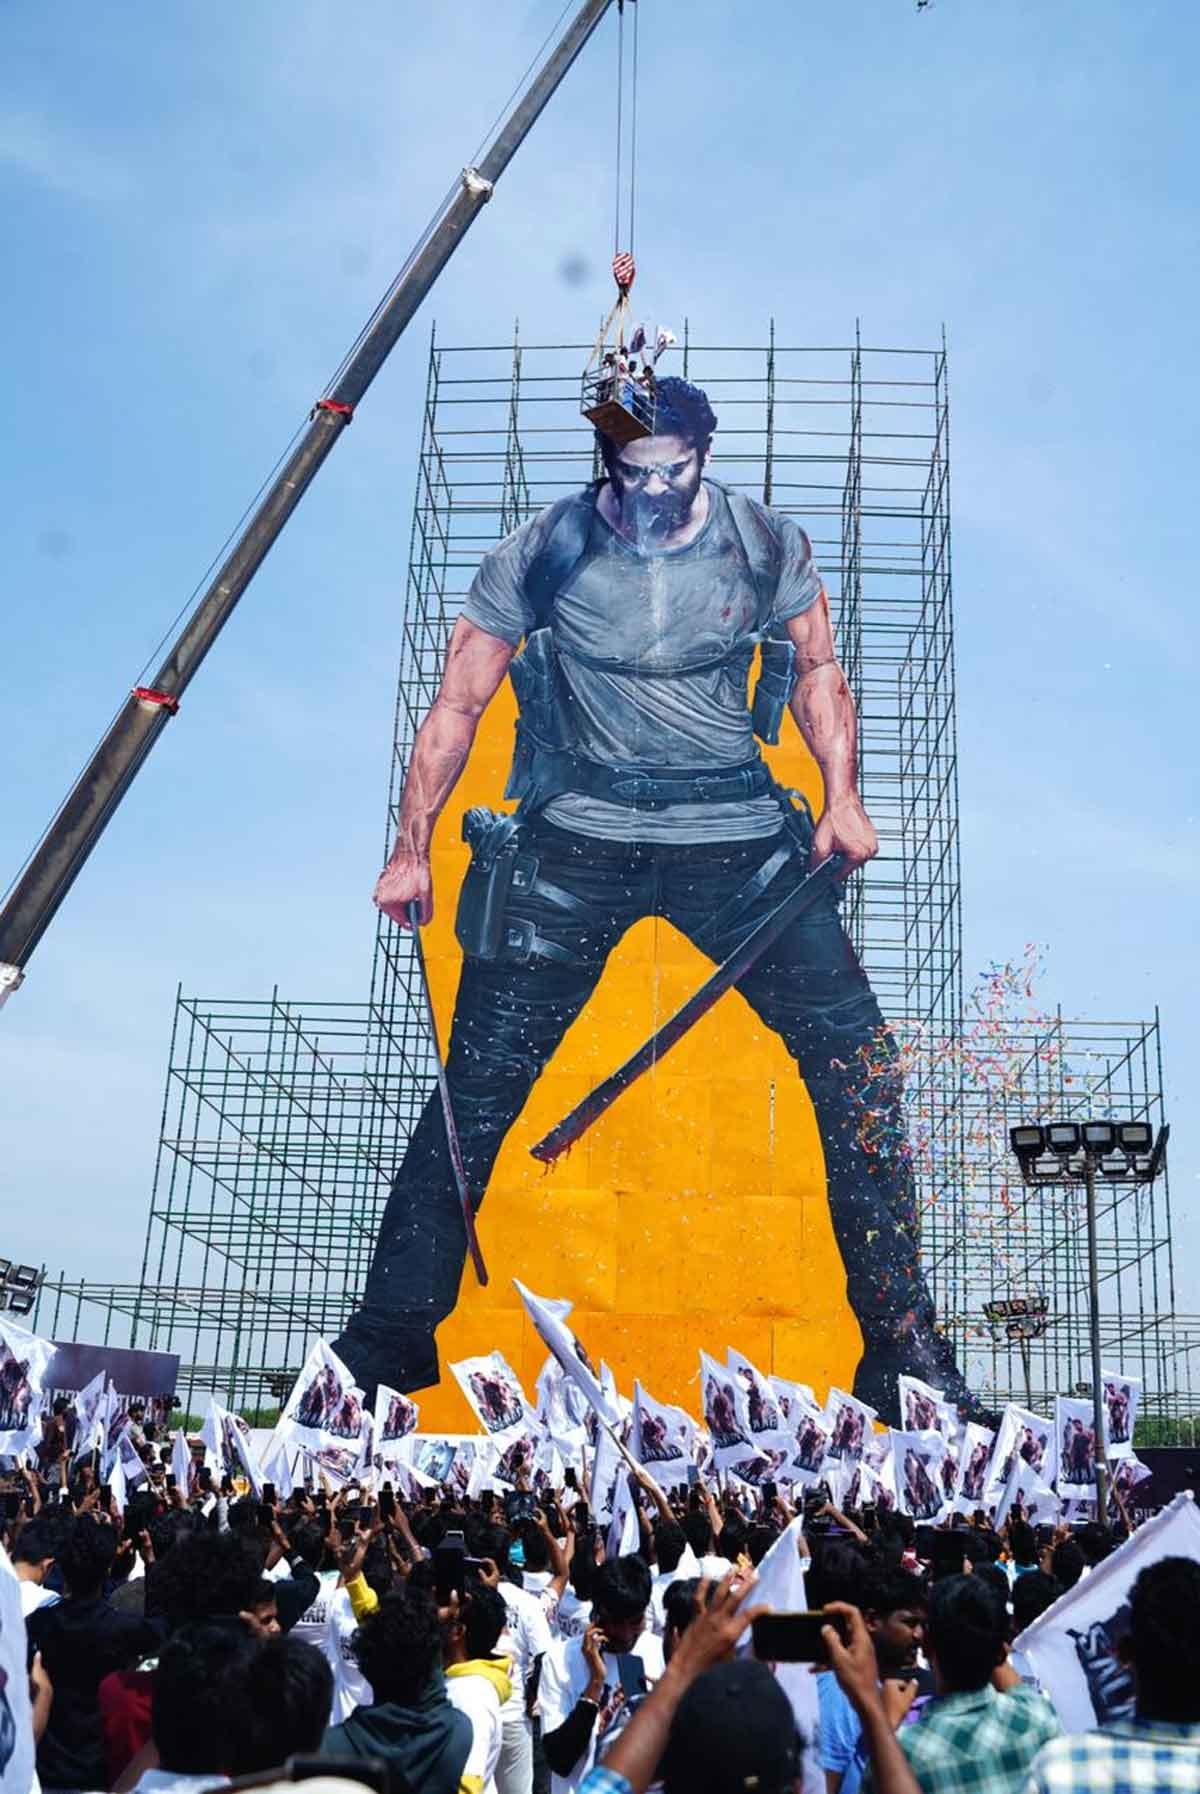 Pan India Star Prabhas huge cutout becomes centre of attraction